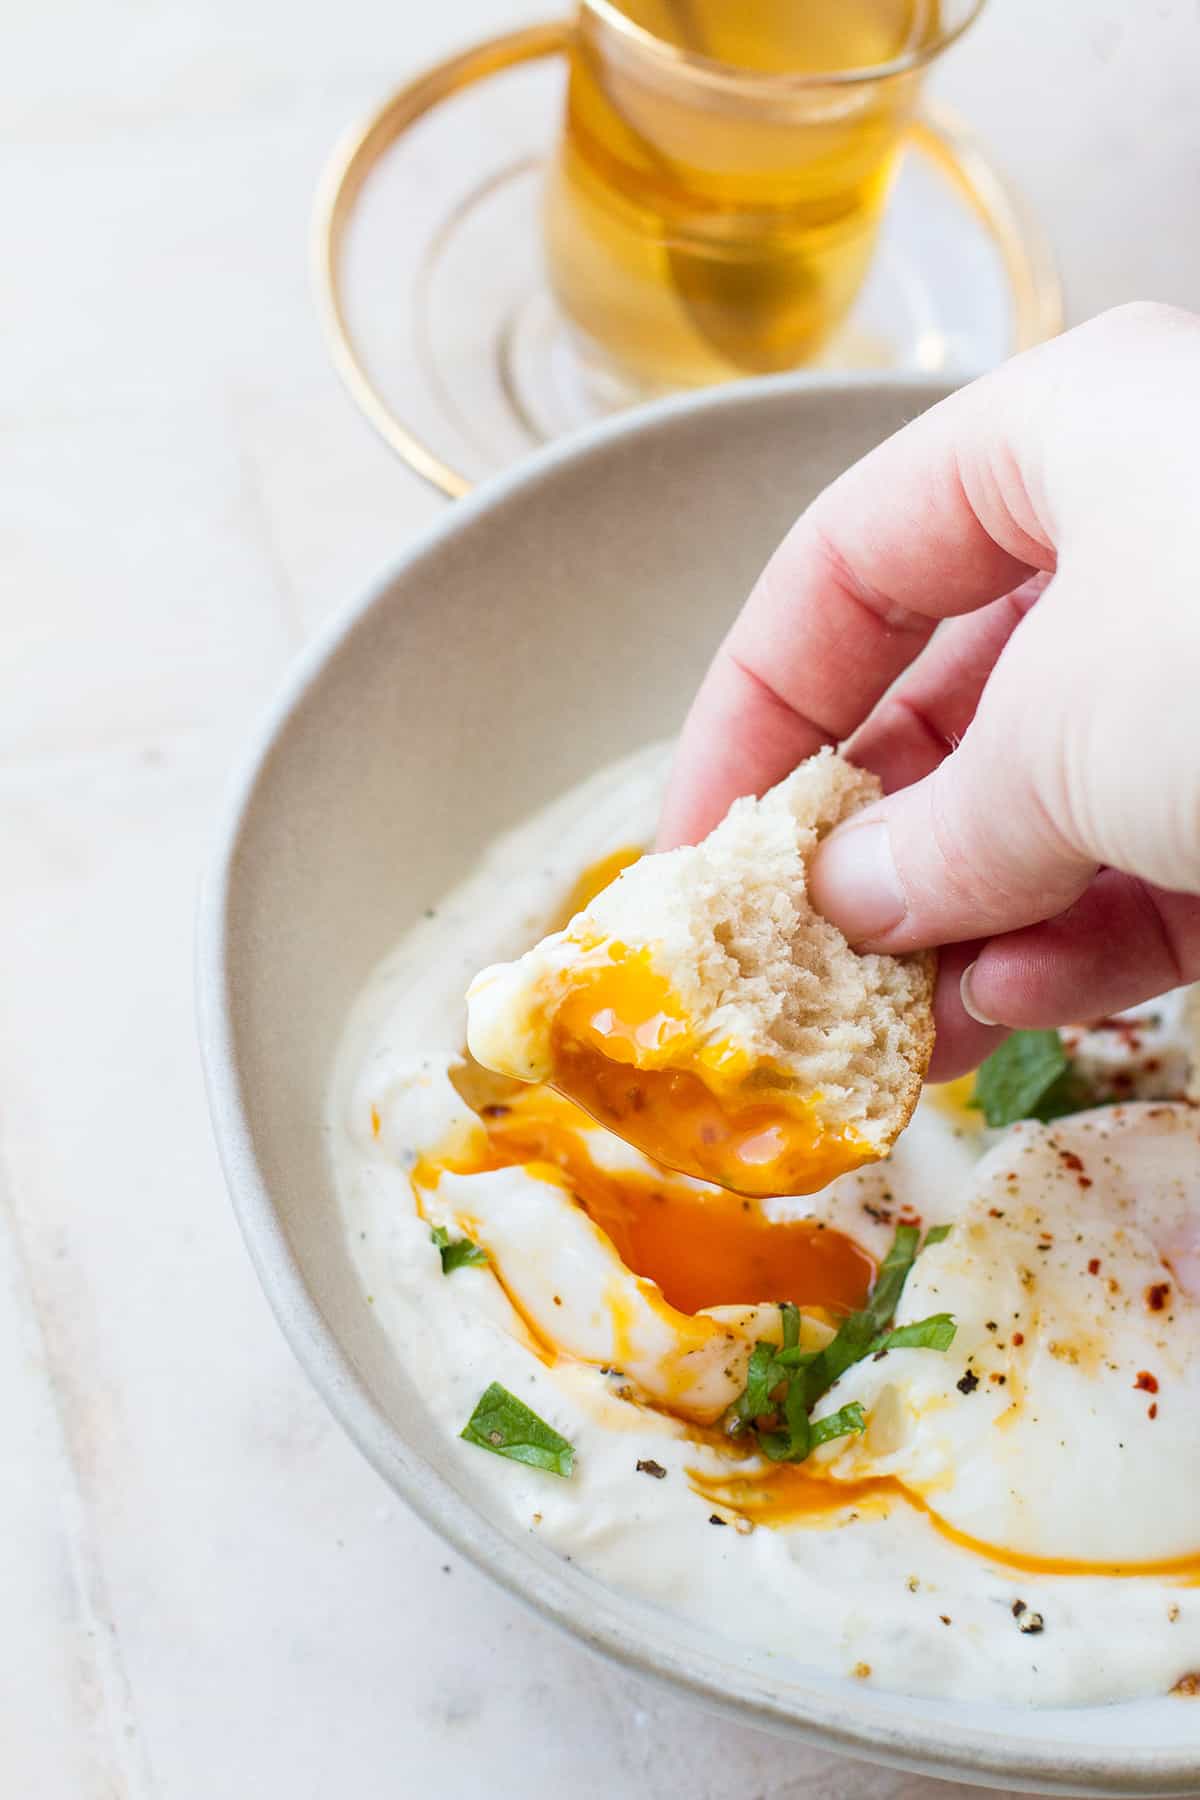 Dipping crusty bread in poached egg yolk.